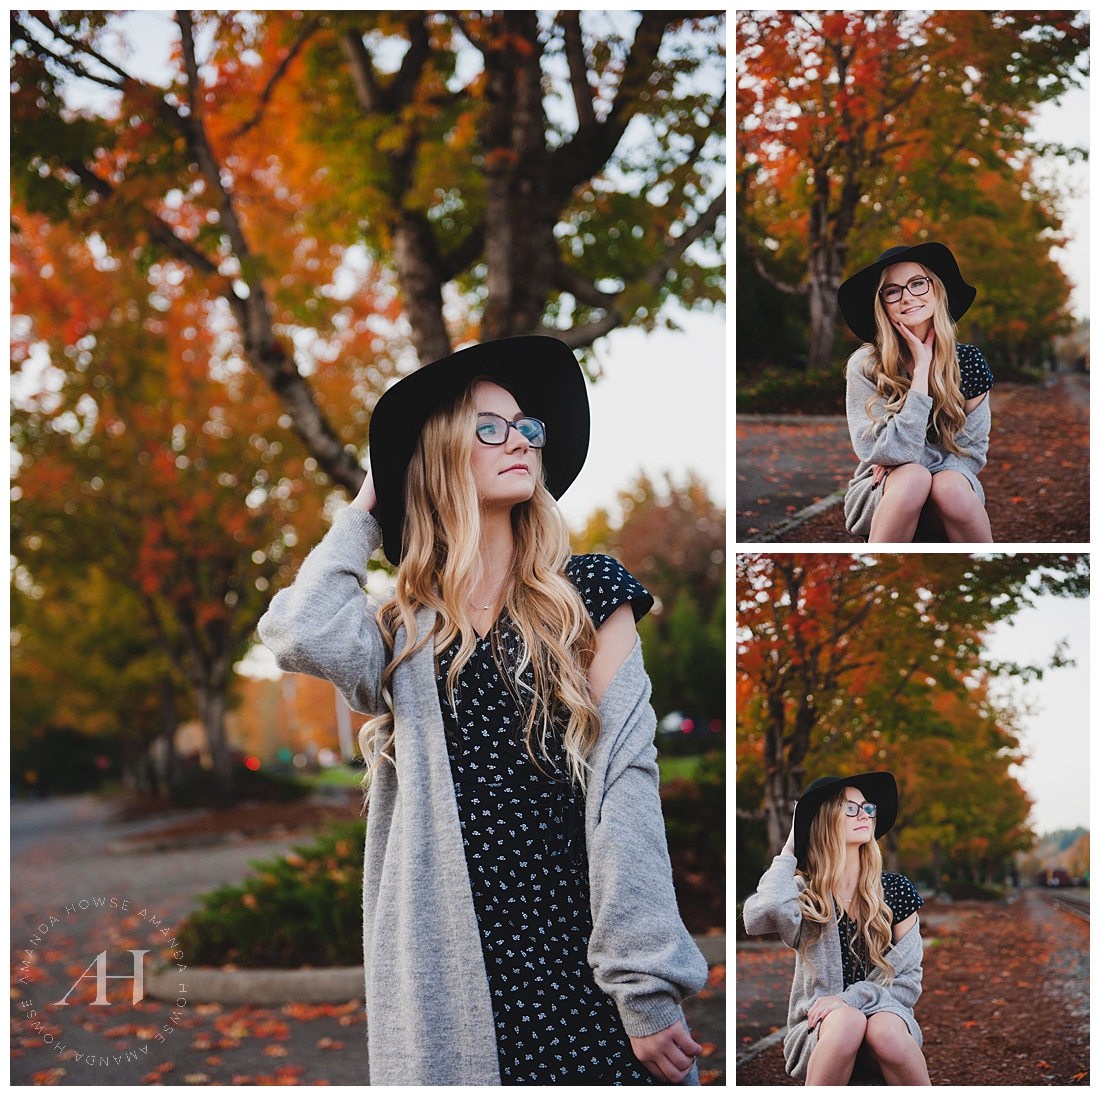 Fun Senior Portraits with Fall Colors | Photographed by Amanda Howse